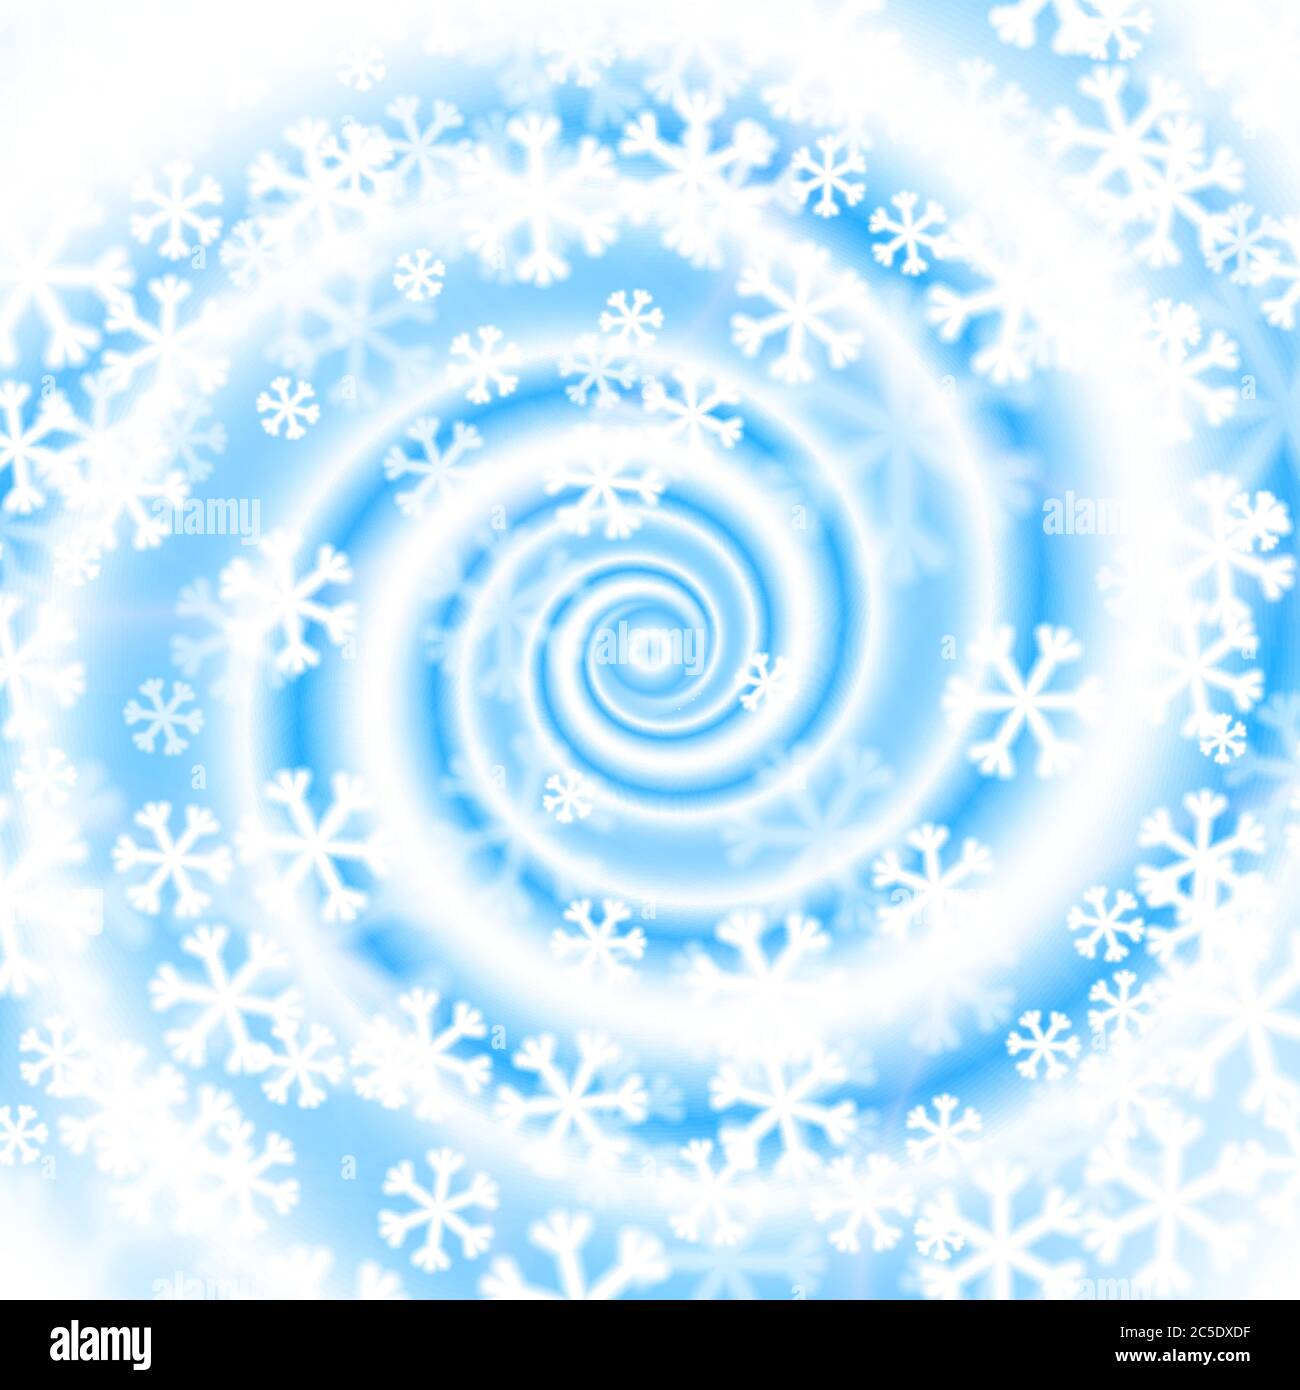 Light blue winter background - Snow blizzard swirl. Vector illustration. Two colored spiral wave - blue and white. Snowflakes spinning in blizzard vor Stock Vector